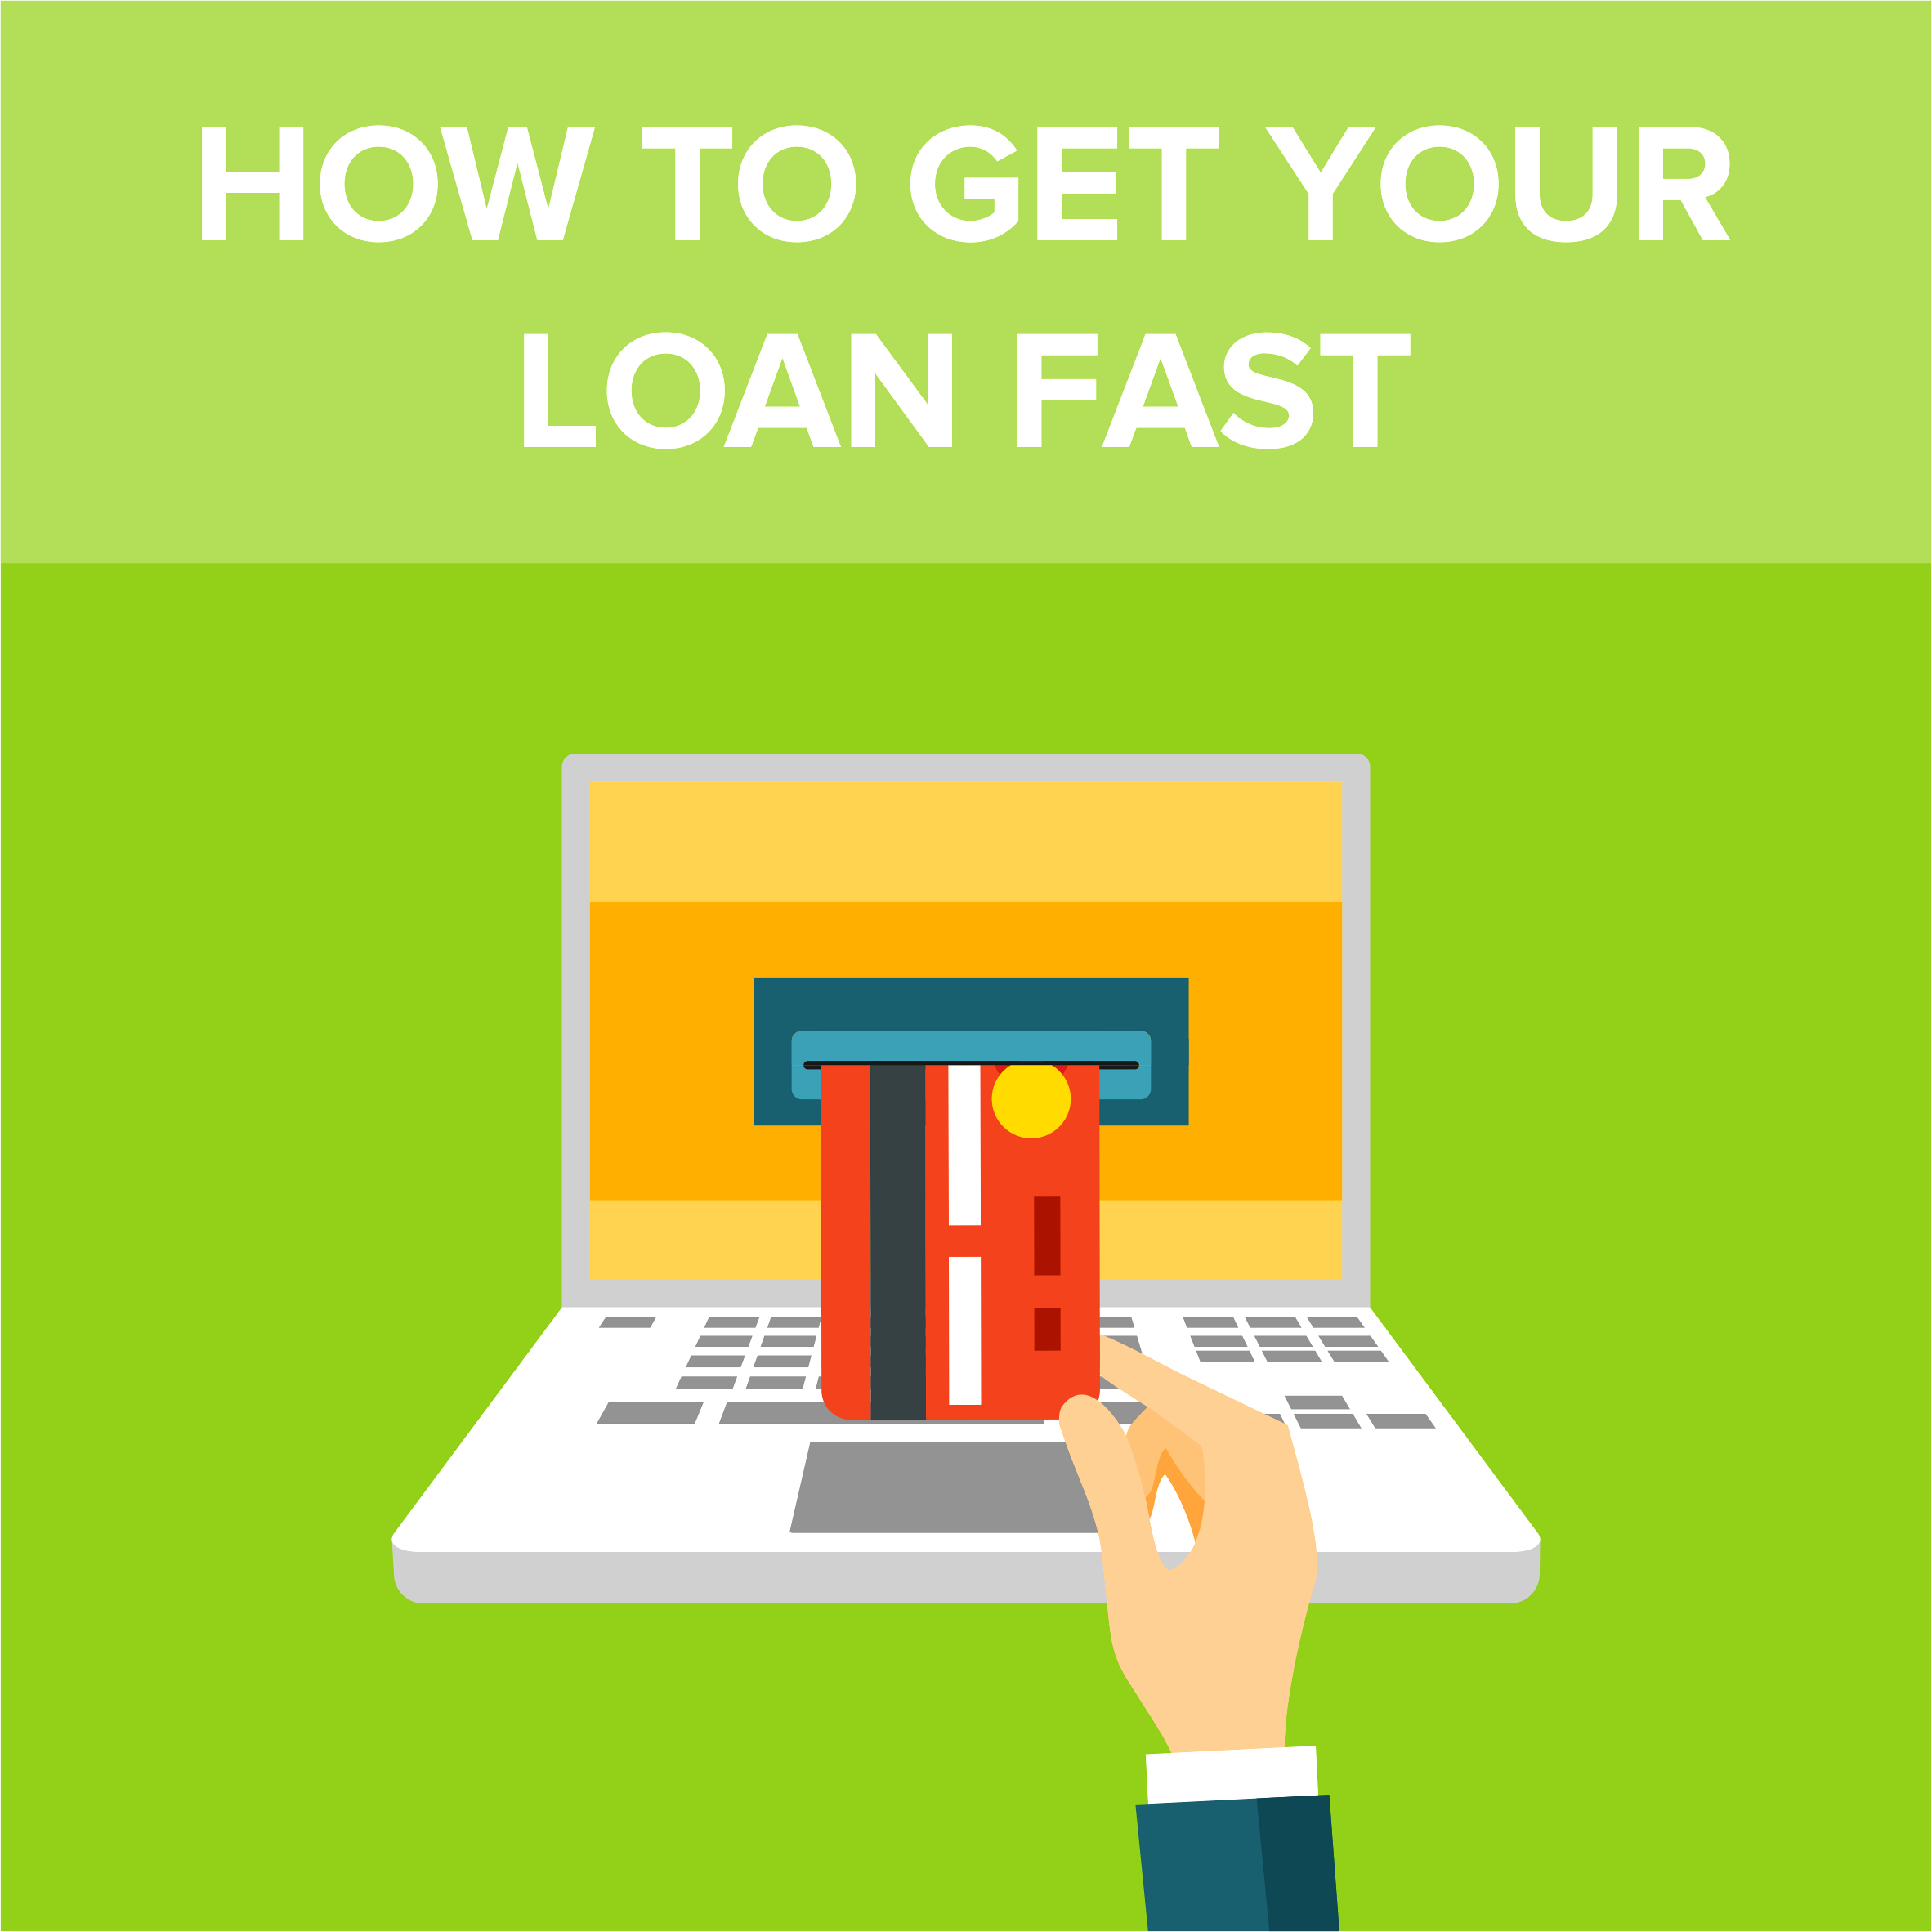 How to Get Your Loan Fast